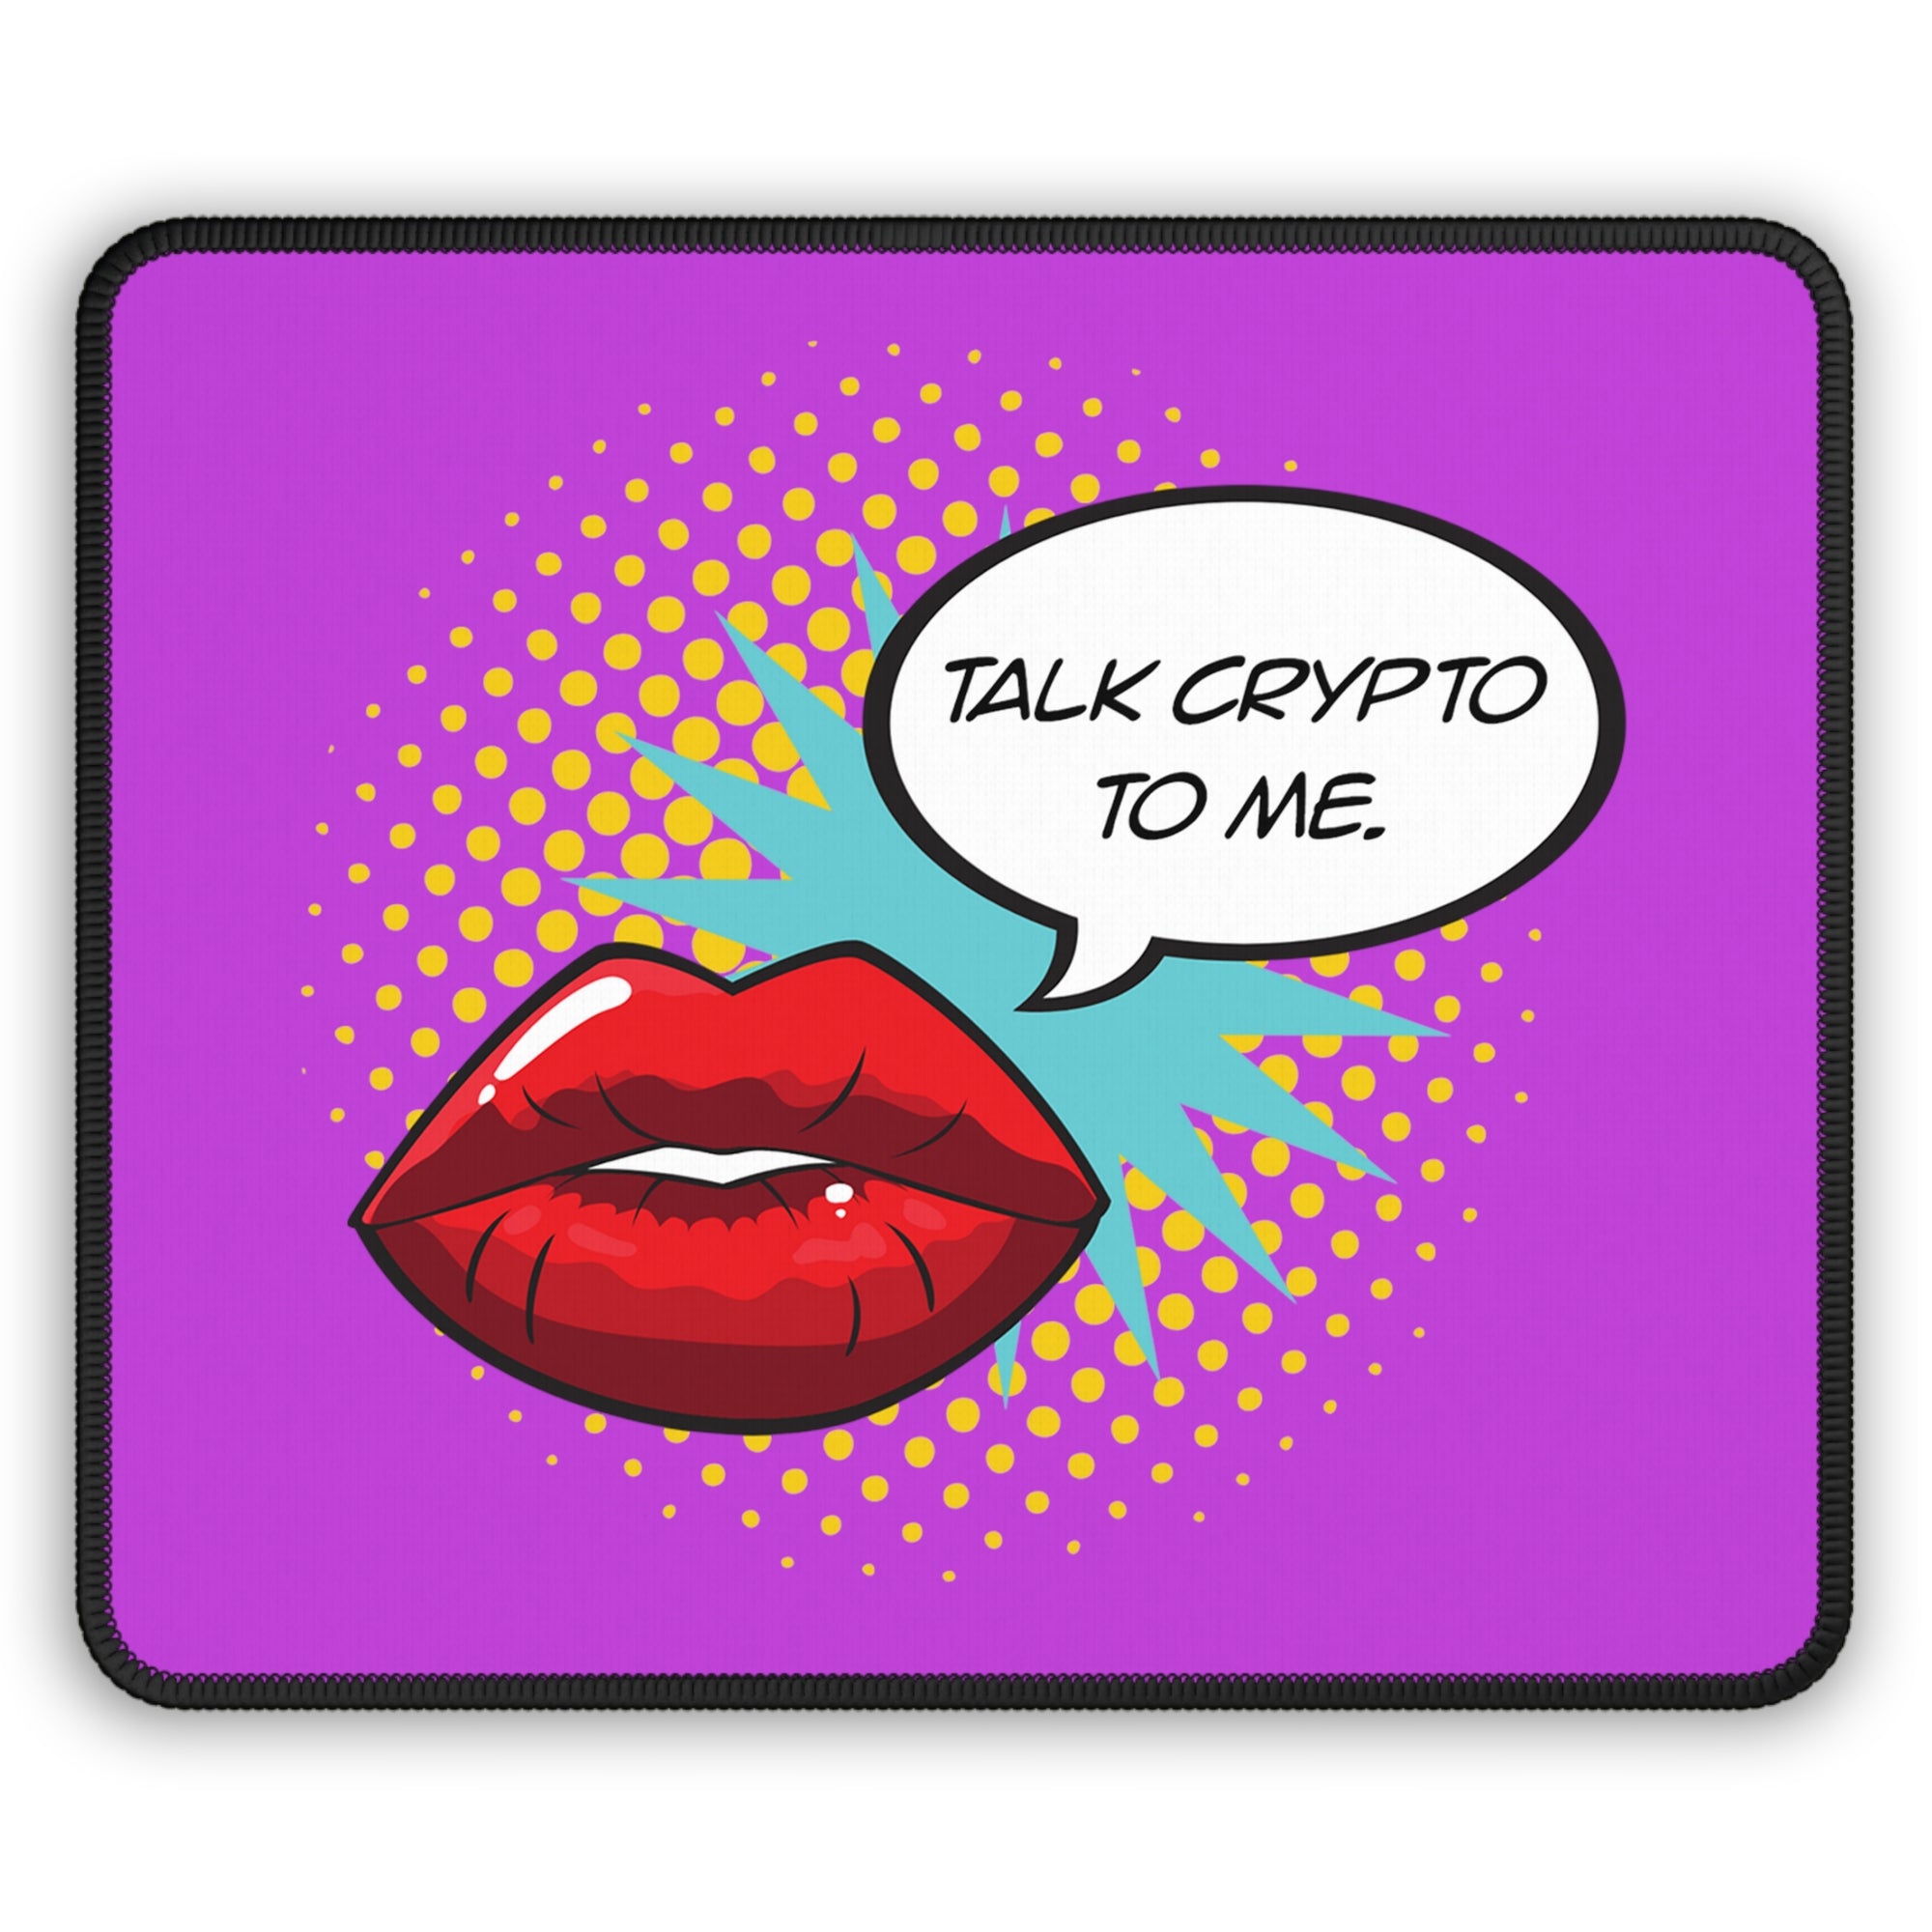 Crypto Merchandise - Talk Crypto To Me Mouse Pad Close Up View.